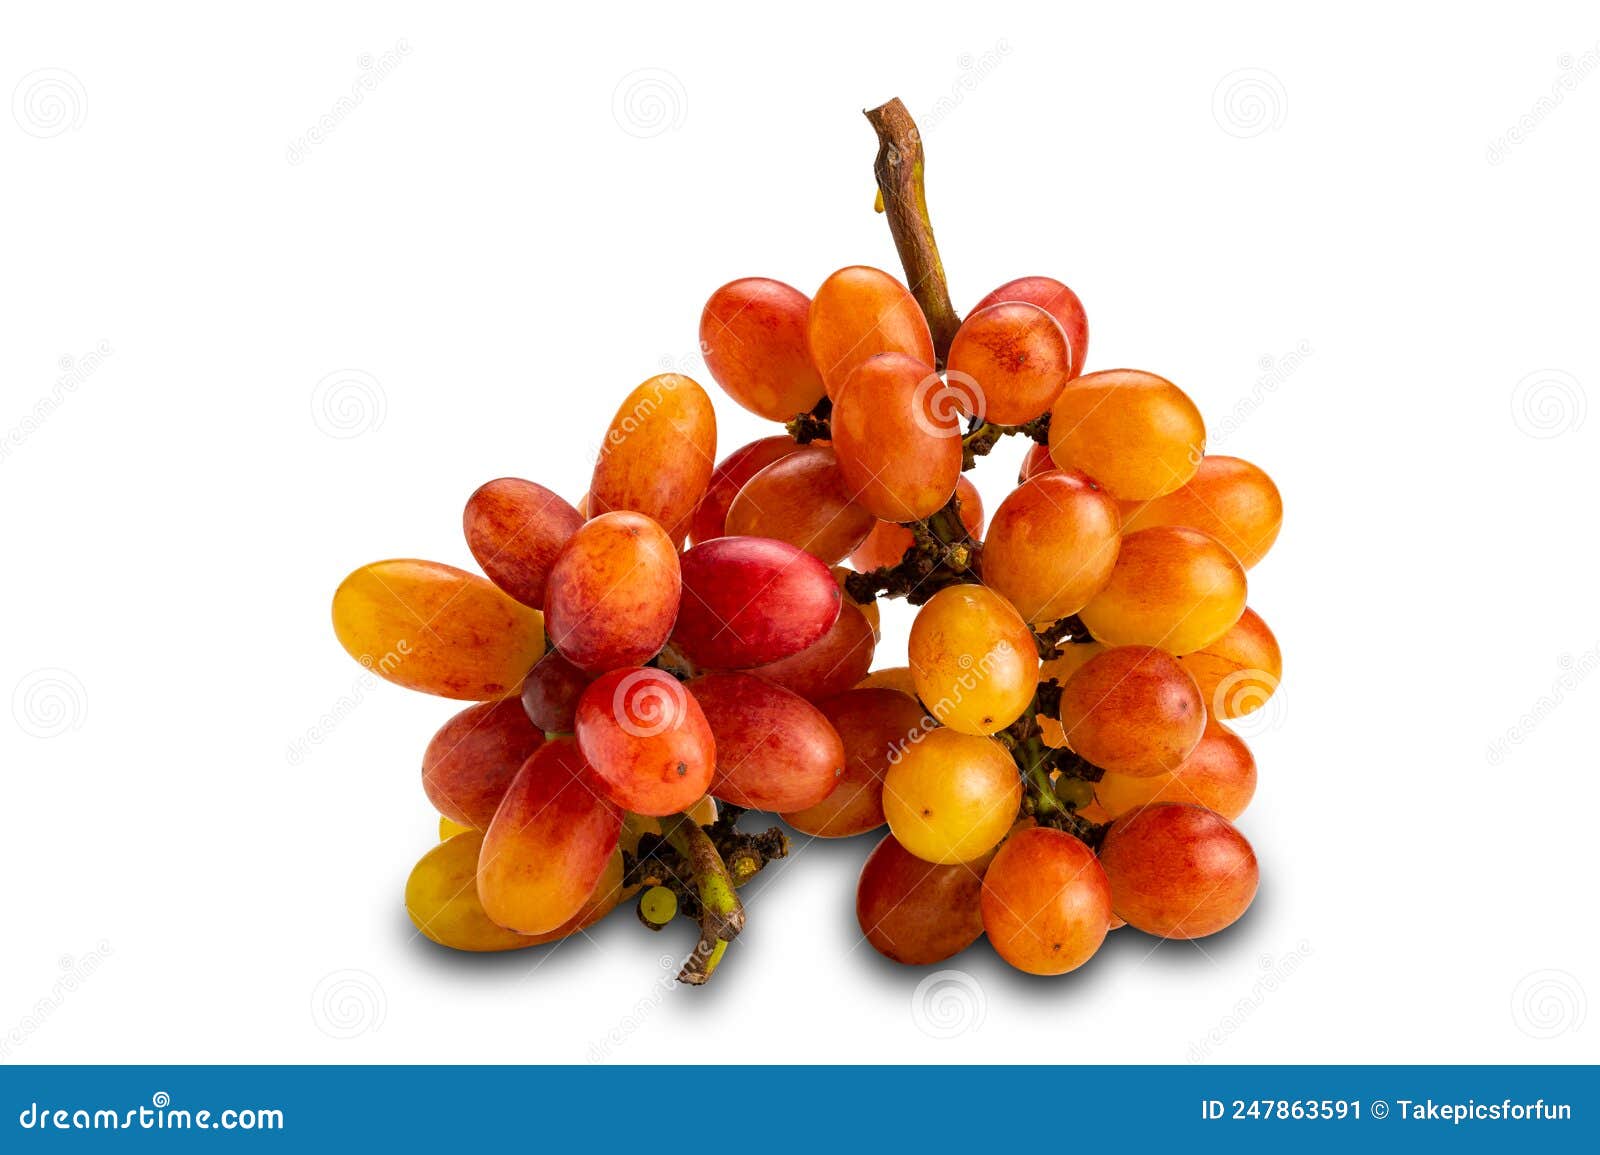 https://thumbs.dreamstime.com/z/bunch-freshly-harvested-ripe-crimson-seedless-red-grapes-isolated-white-background-clipping-path-247863591.jpg